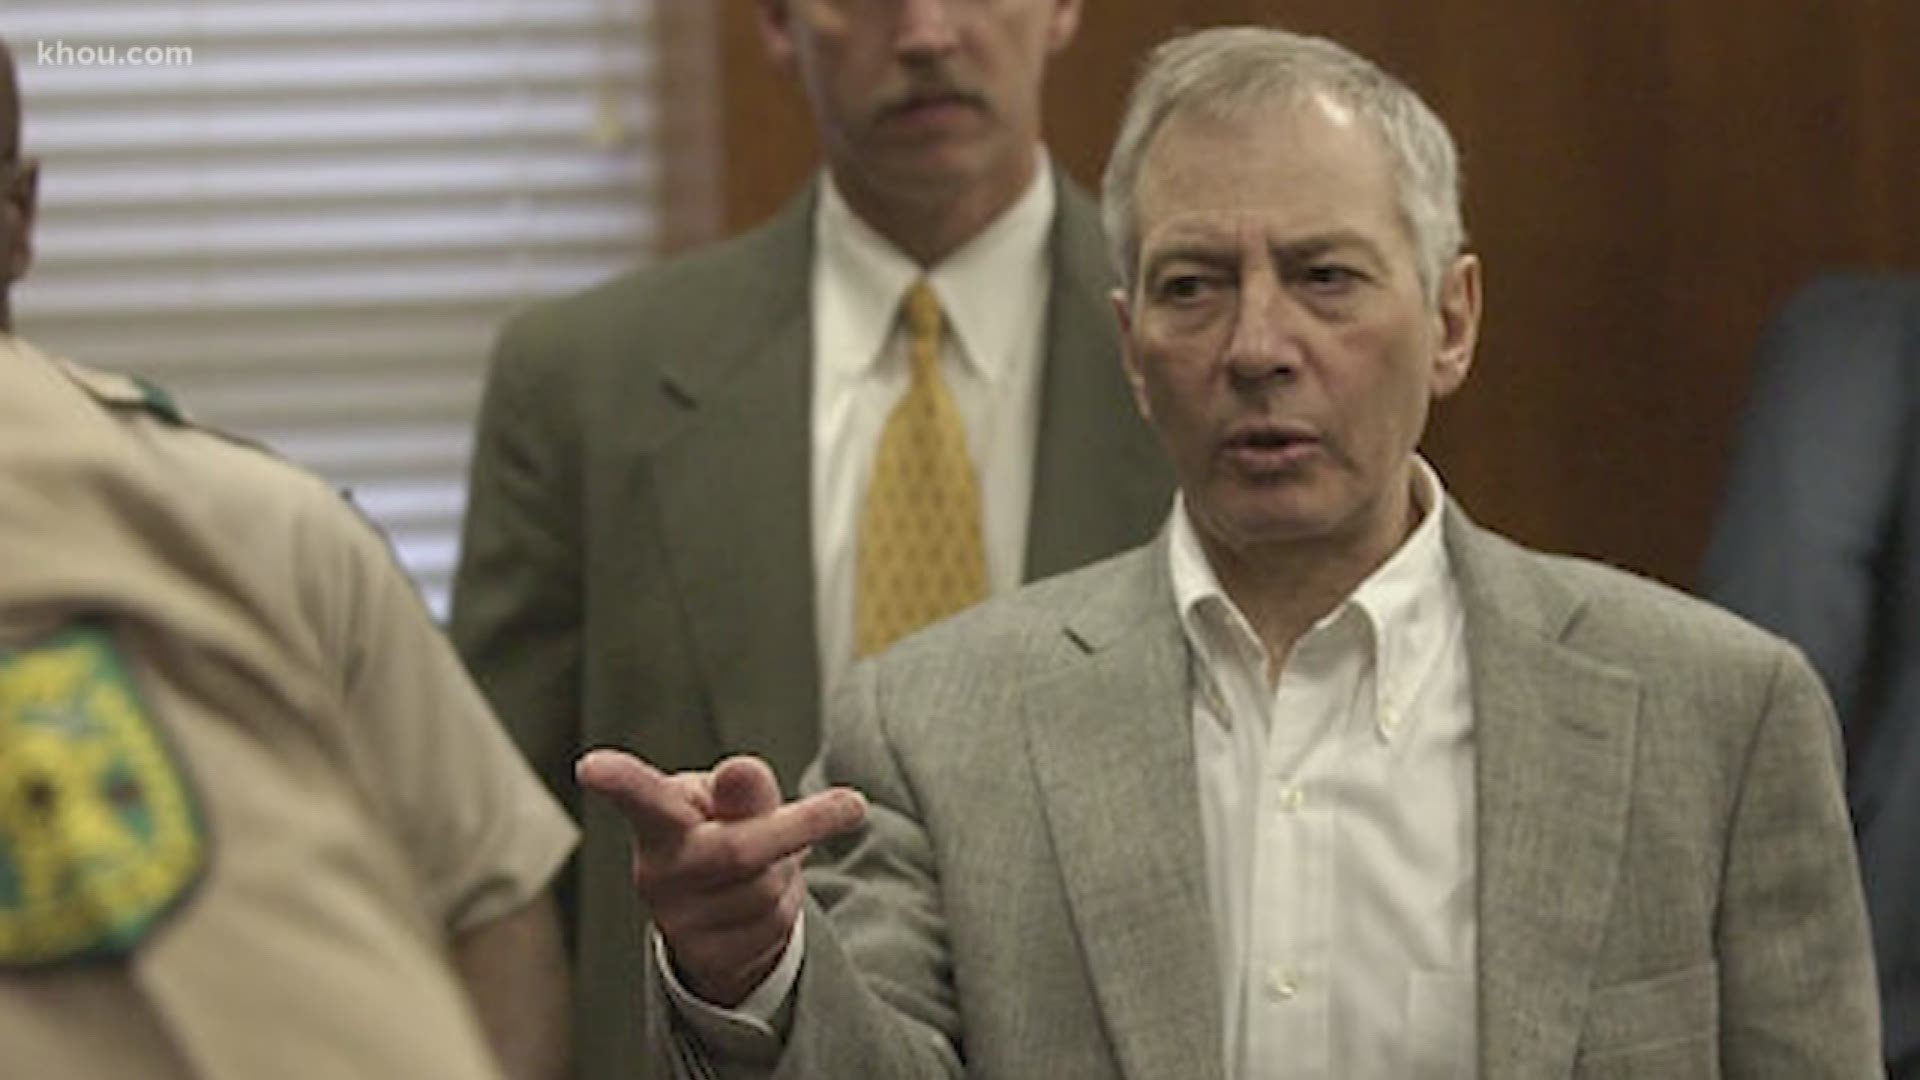 Robert Durst was acquitted of murder in Galveston. However, evidence from that bizarre trial could play a key role in the California case.